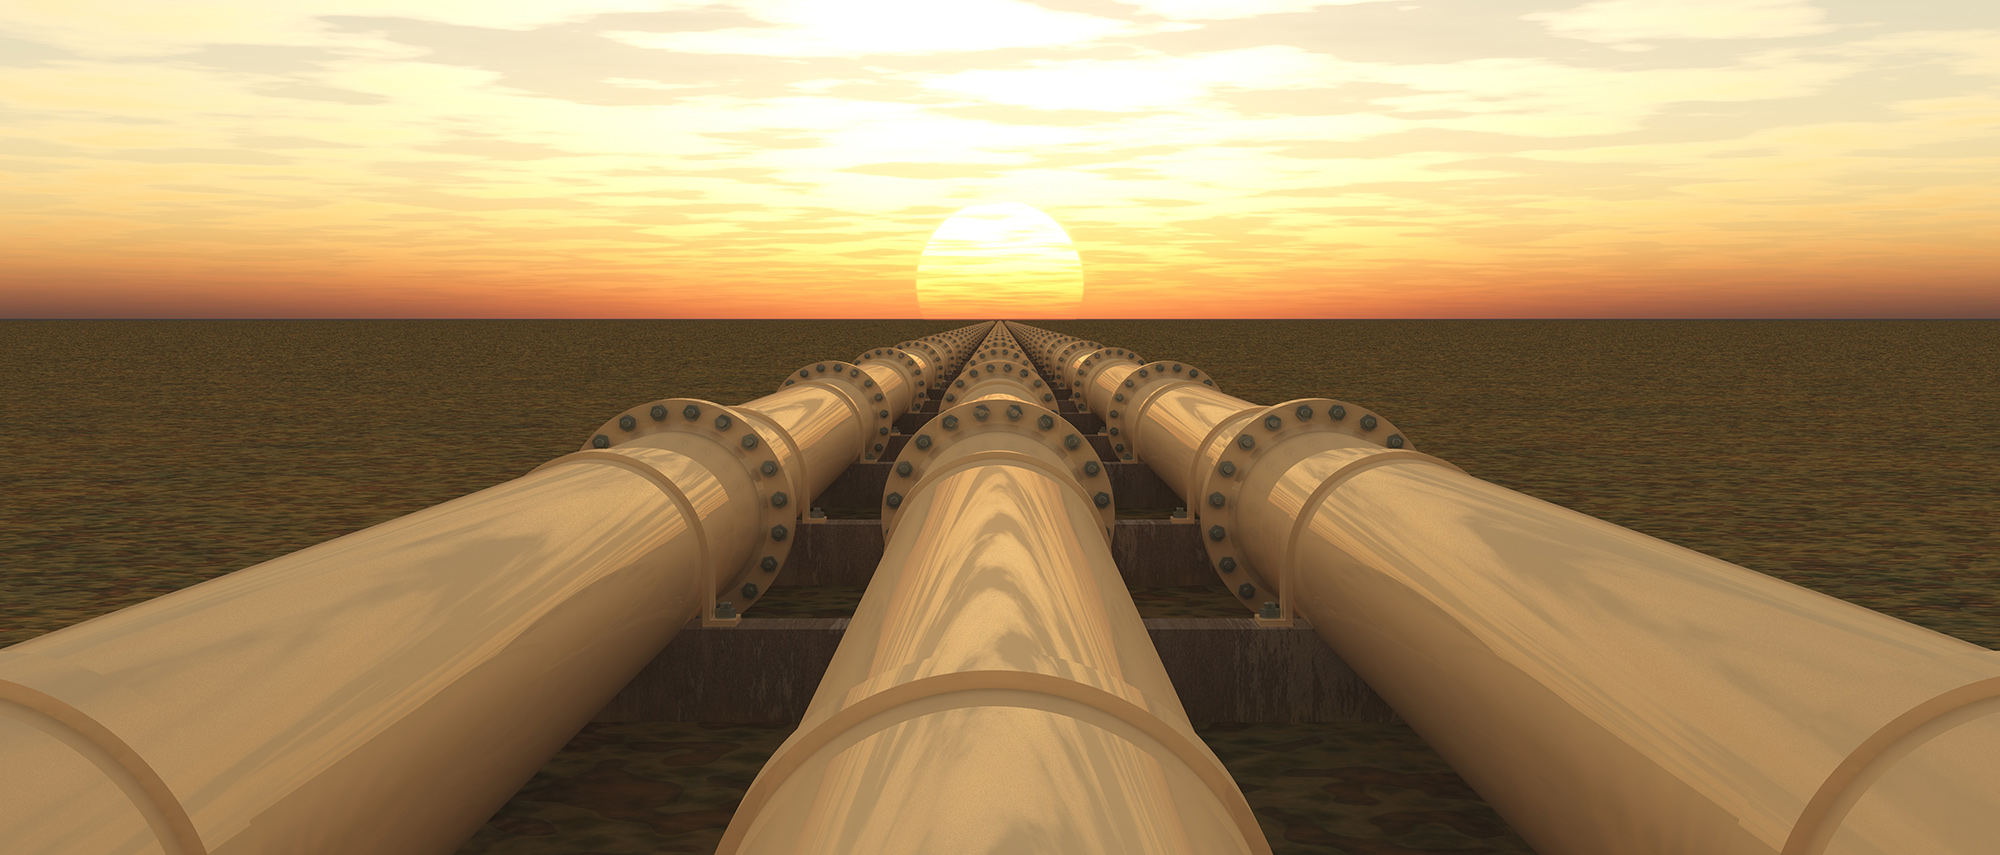 Onshore Pipelines Forecast – Operations and Maintenance Activity to Boost Spend